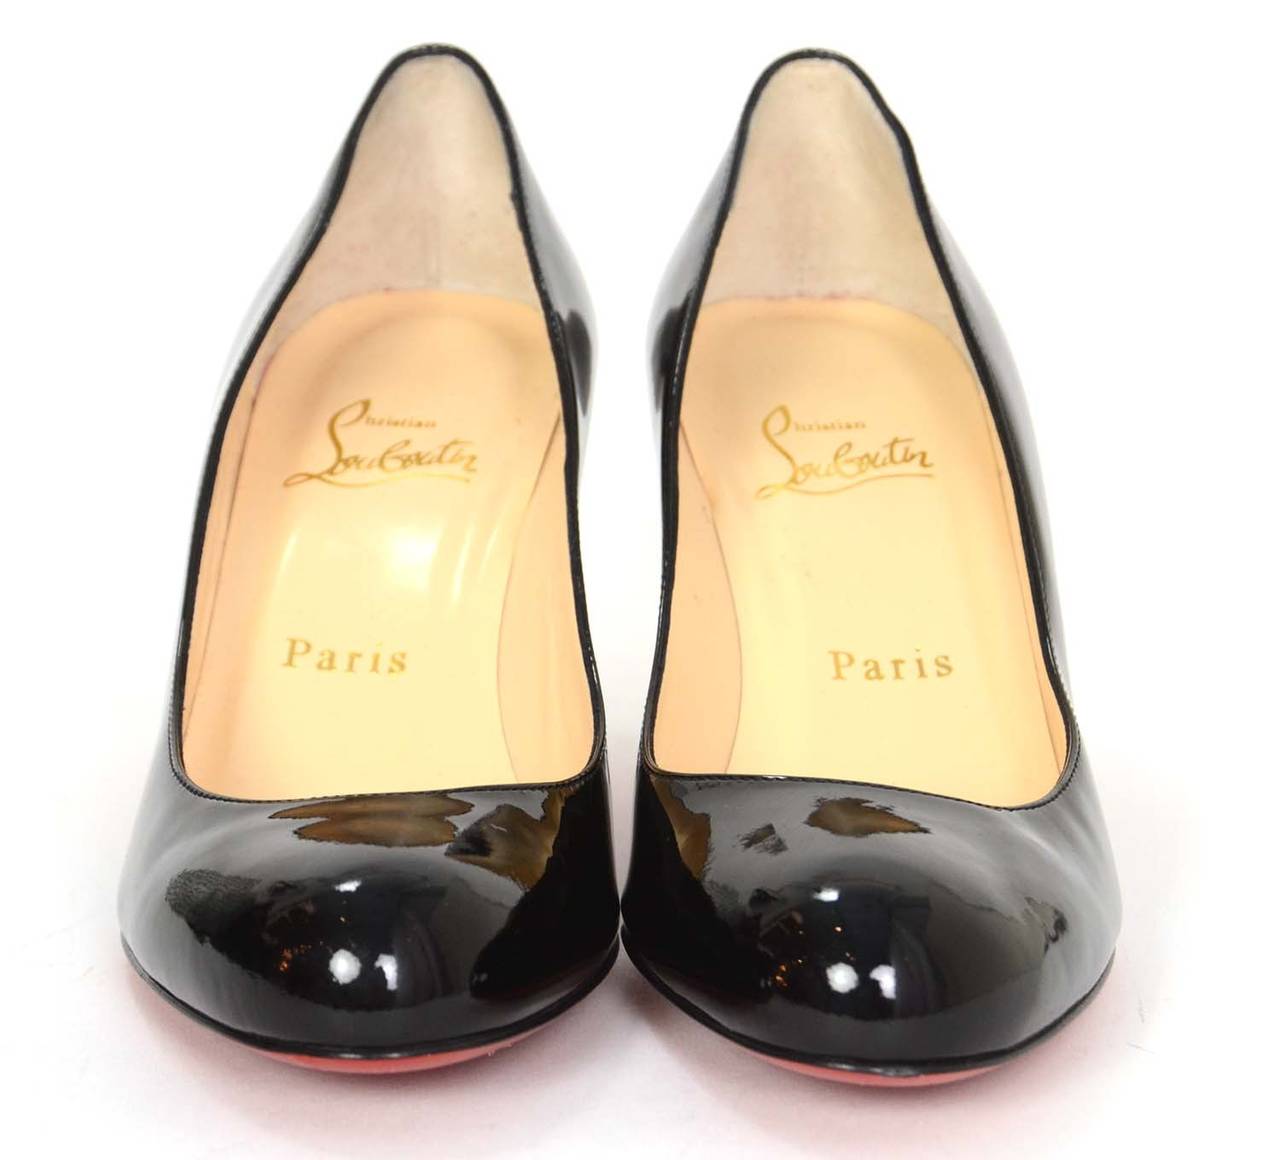 Christian Louboutin Black Patent 70mm Simple Pumps
Made in: Italy
Color: Black and red
Composition: Patent leather
Sole Stamp: Christian Louboutin Made in Italy 36 1/2
Closure/opening: Slide on
Current Retail: $675 + tax
Overall Condition: